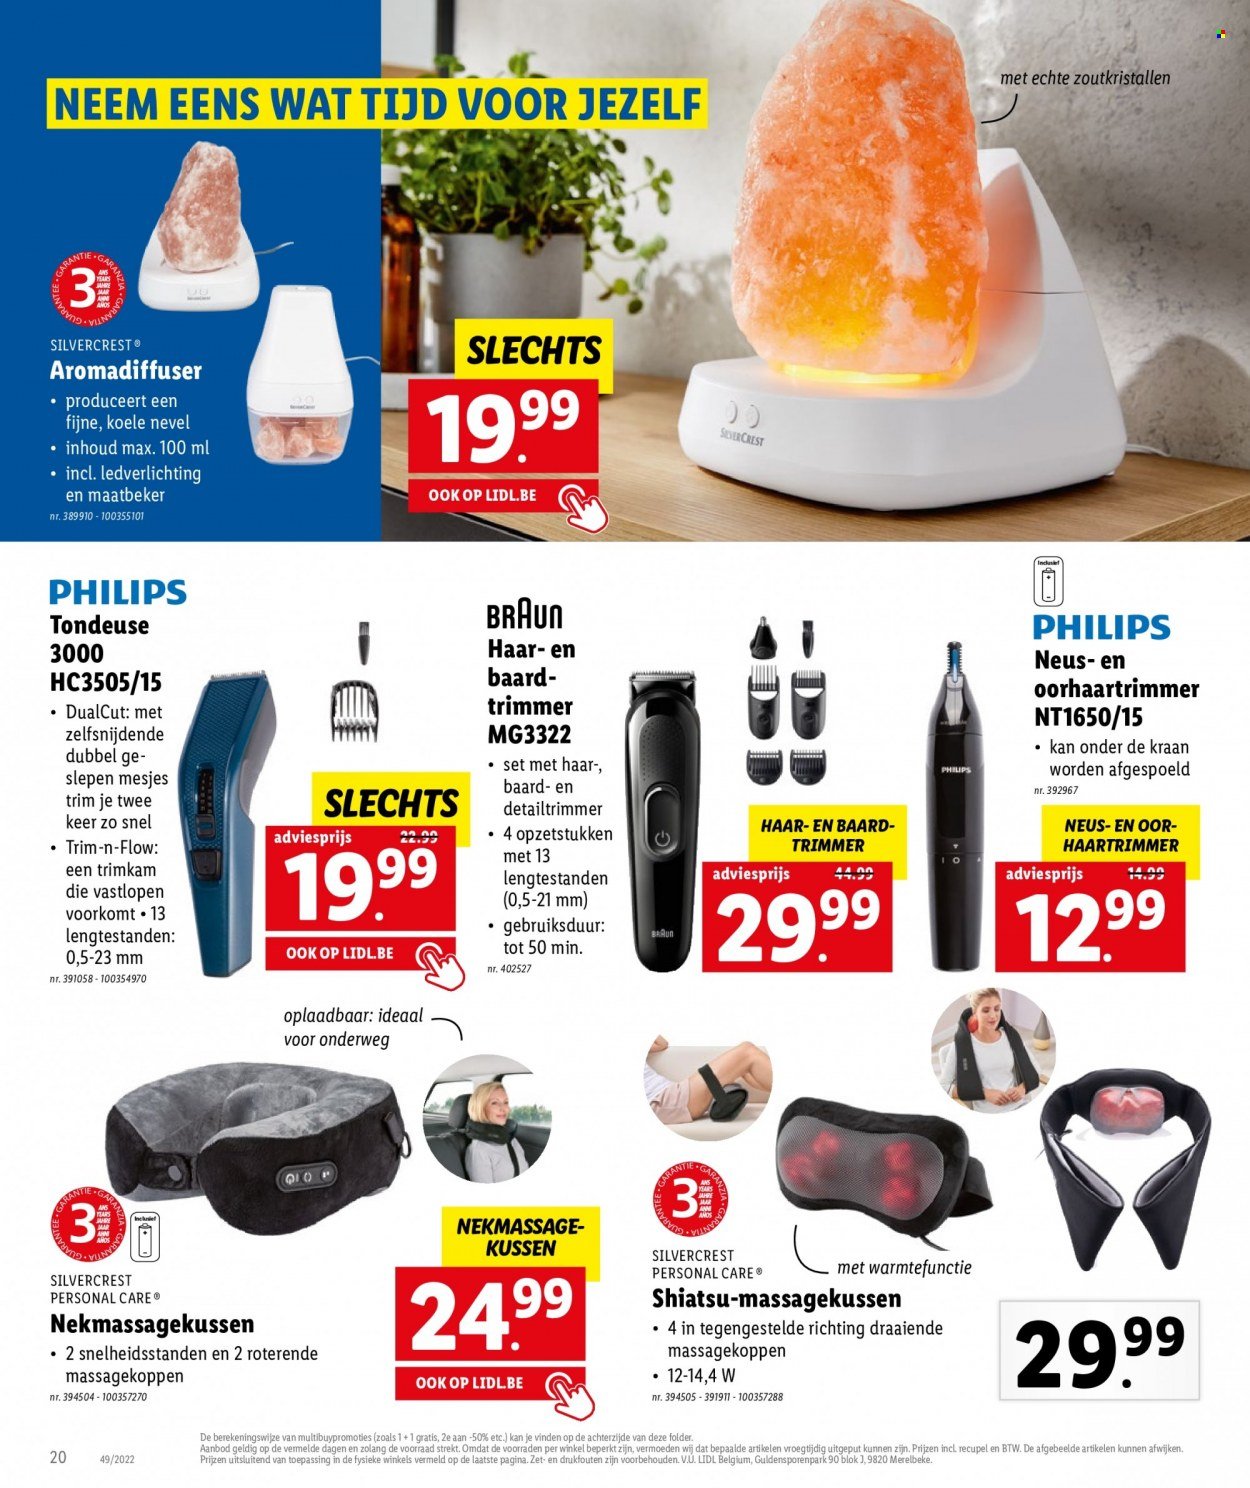 Catalogue Lidl - 5.12.2022 - 10.12.2022. Page 20.